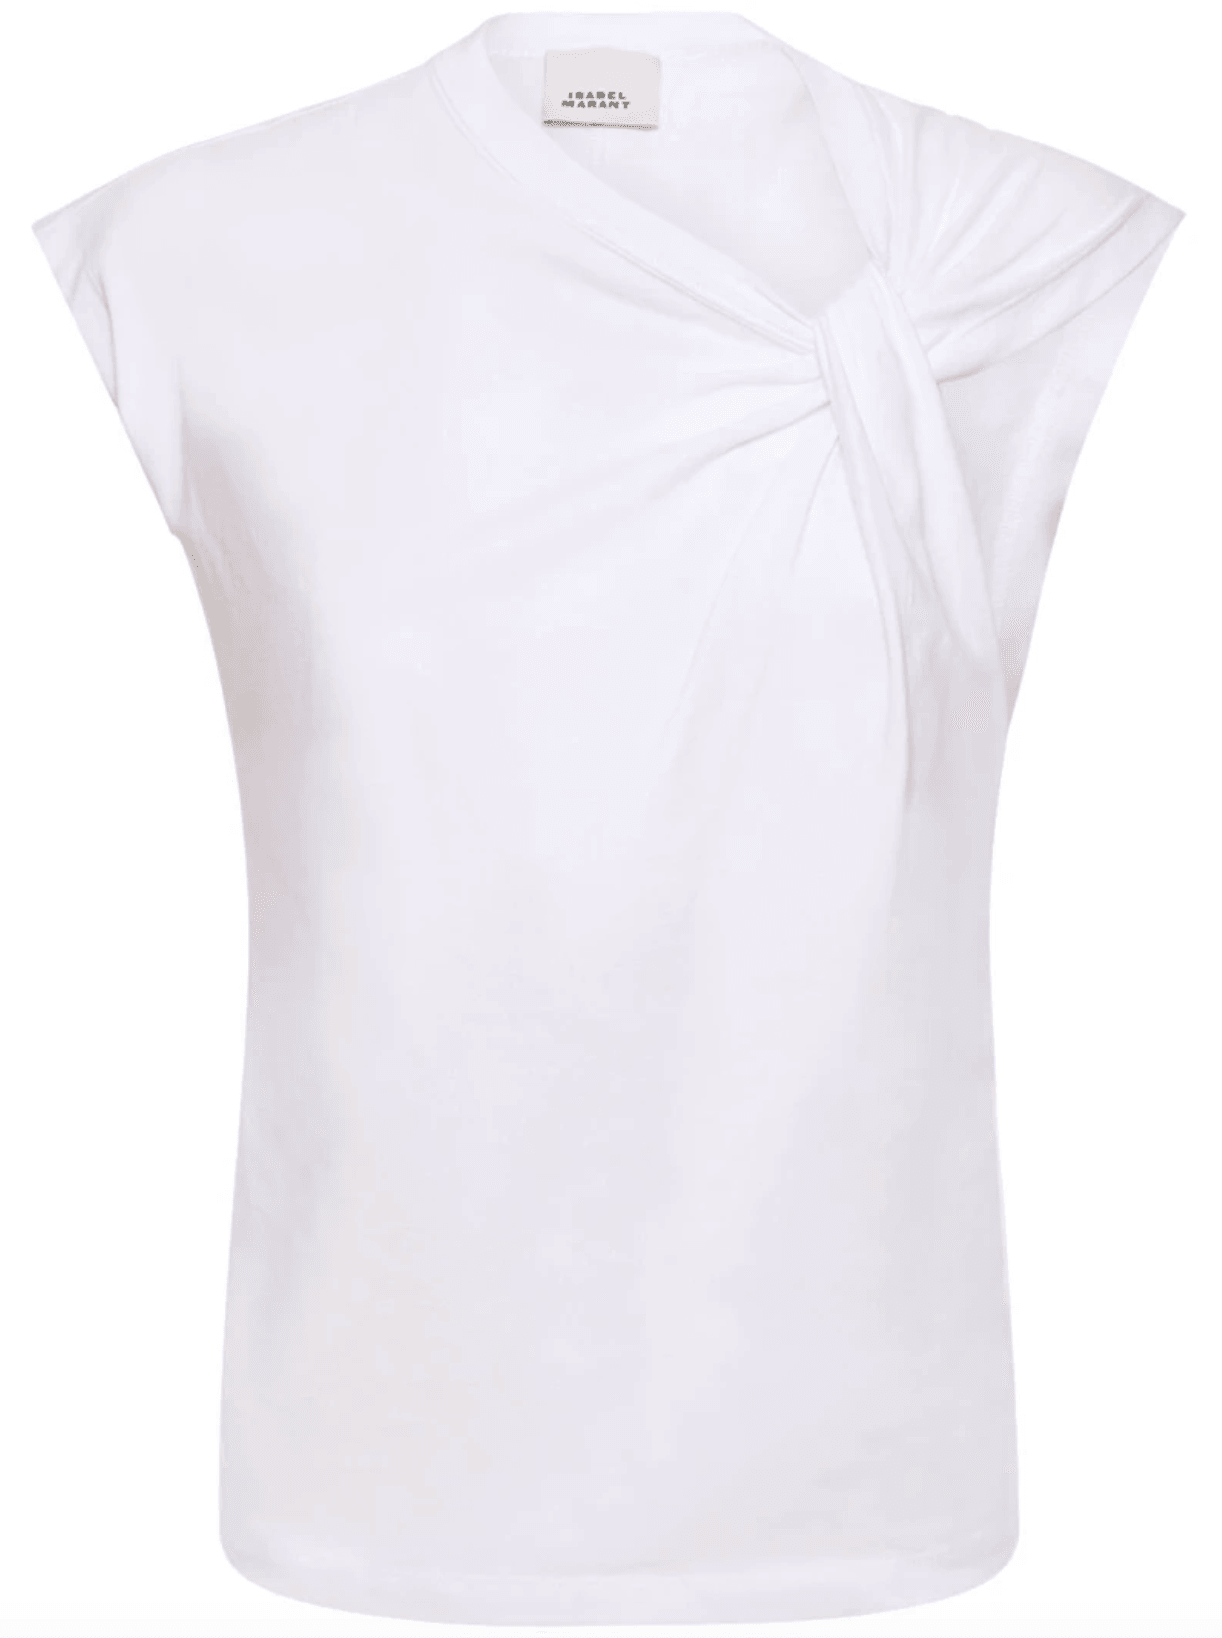 Isabel Marant - Nayda White Knotted T-Shirt - 32 The Guild